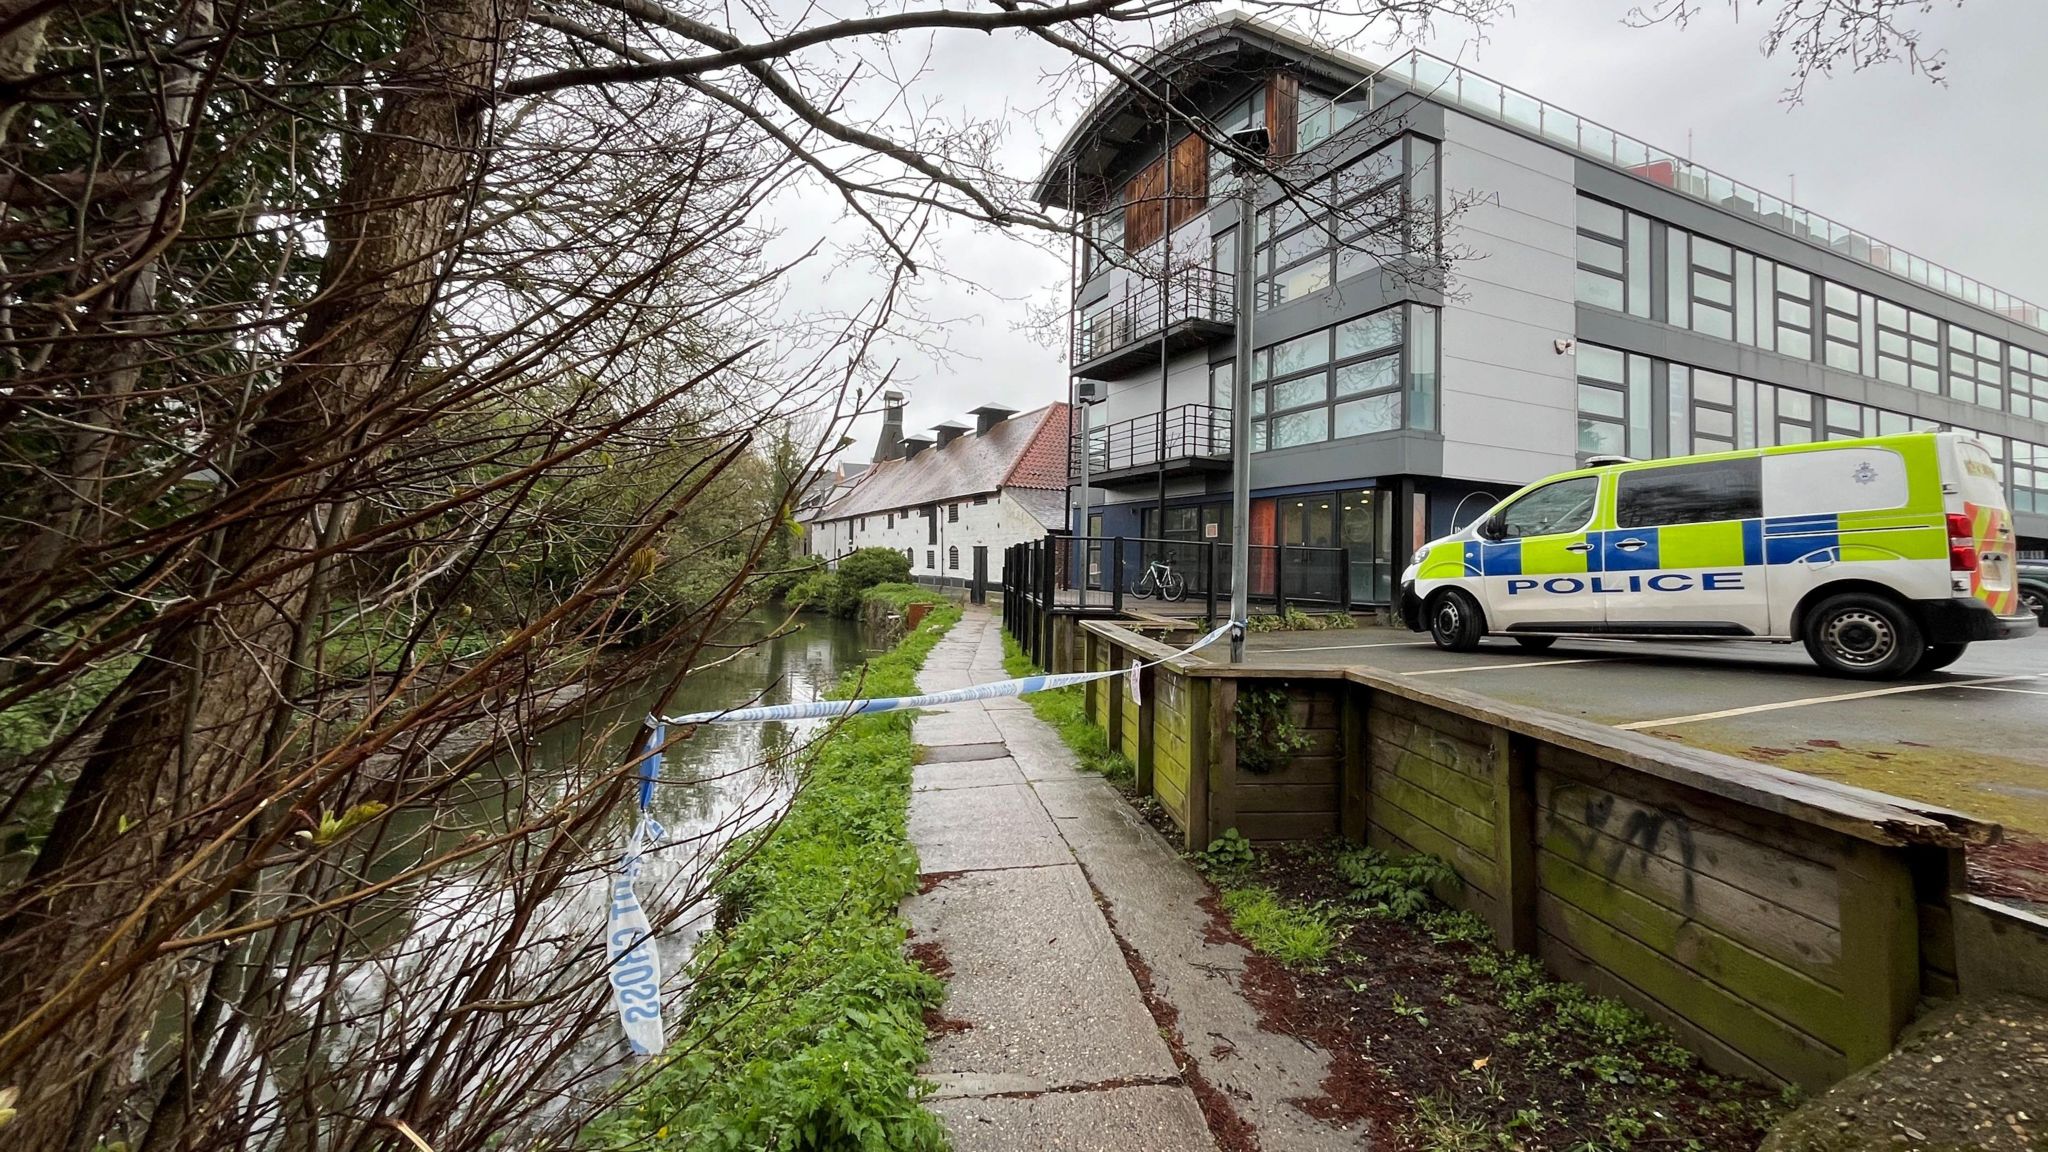 A general view of the cordon near the canal in the area